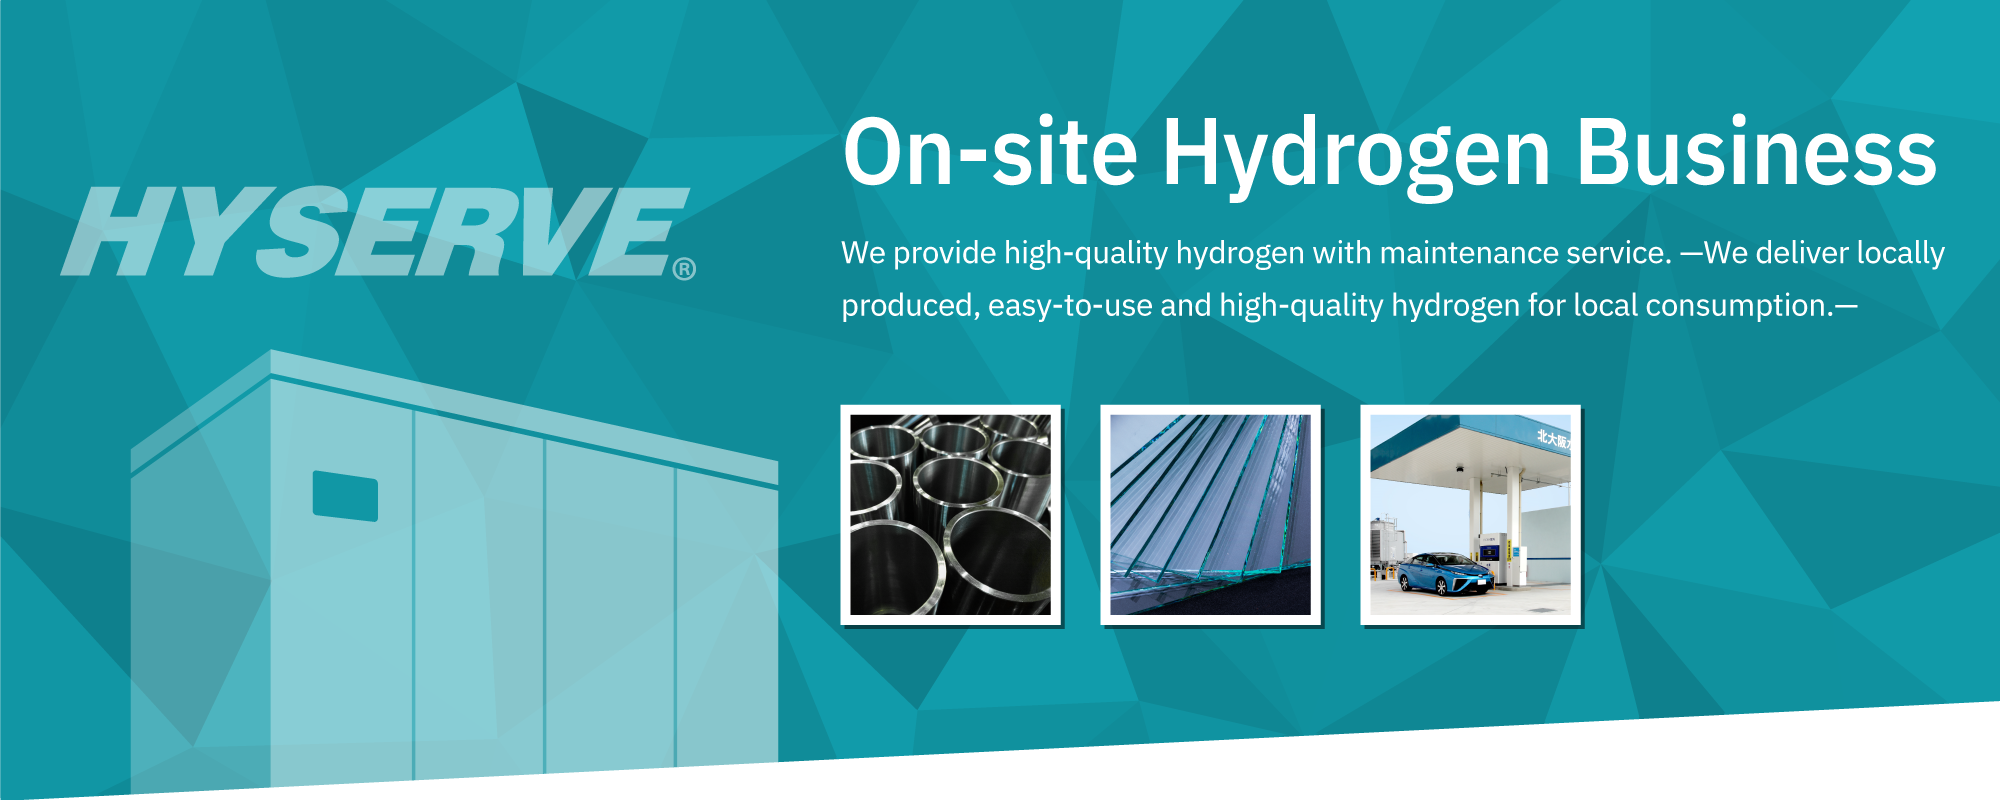 On-site Hydrogen Business: We provide high-quality hydrogen with maintenance service. —We deliver locally produced, easy-to-use and high-quality hydrogen for local consumption.—